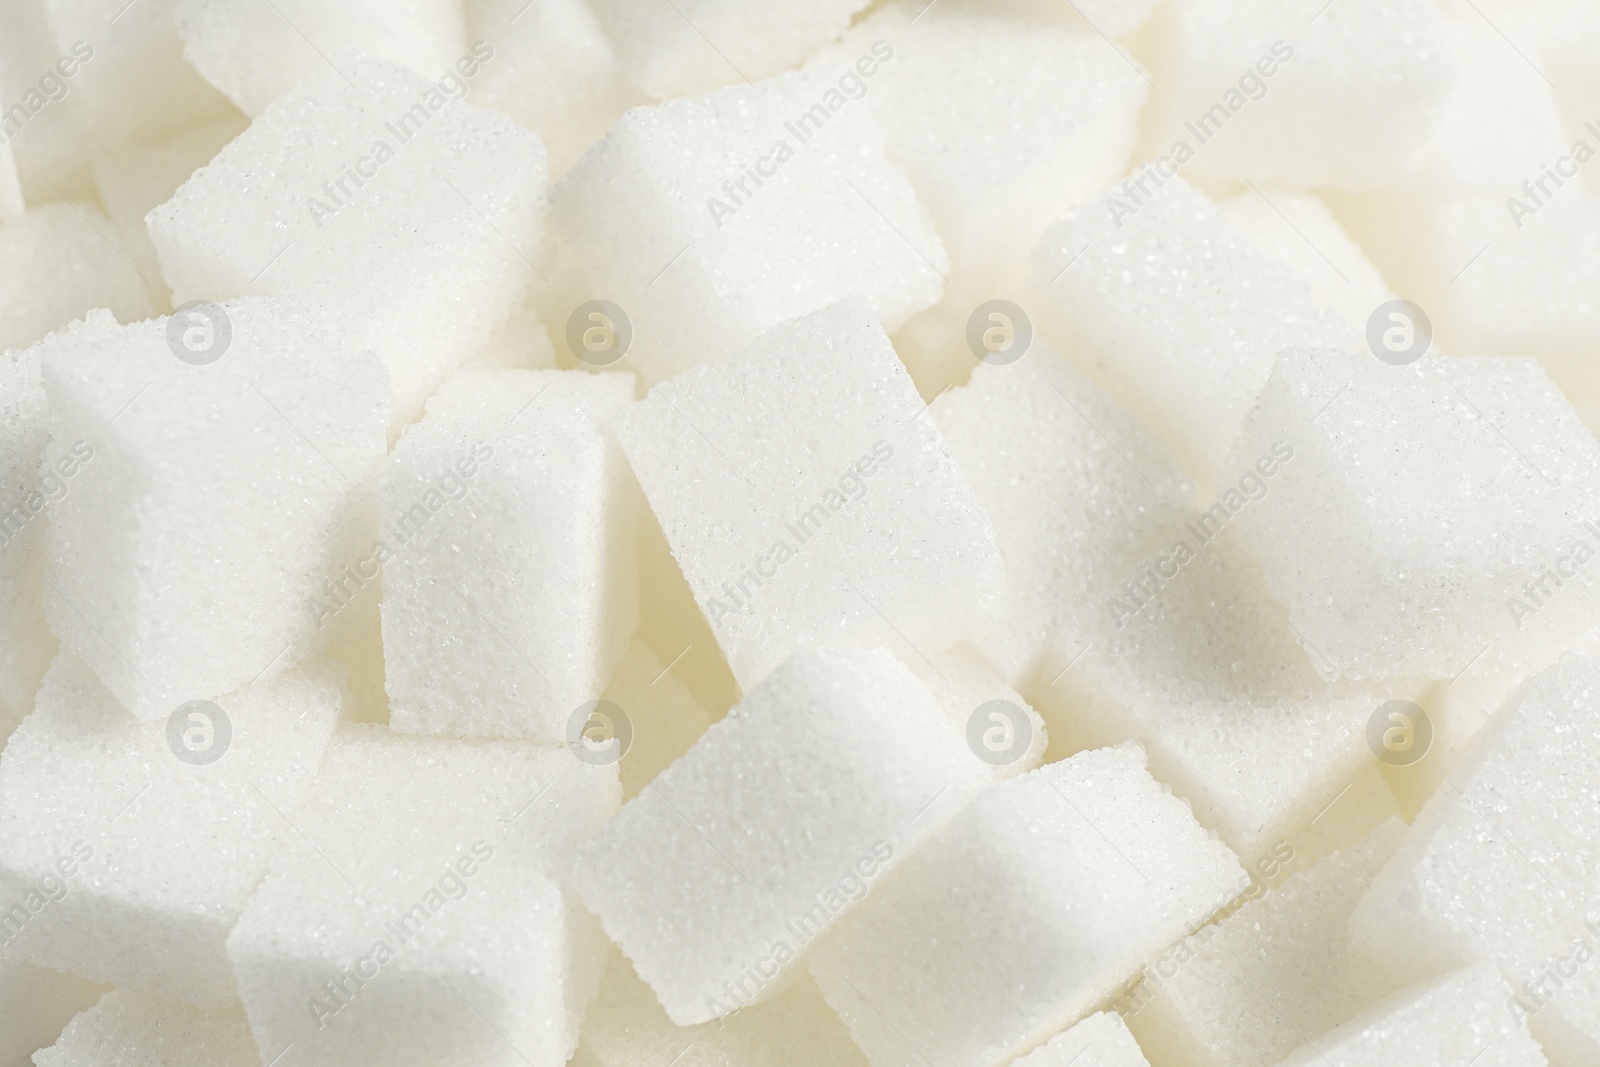 Photo of White sugar cubes as background, closeup view